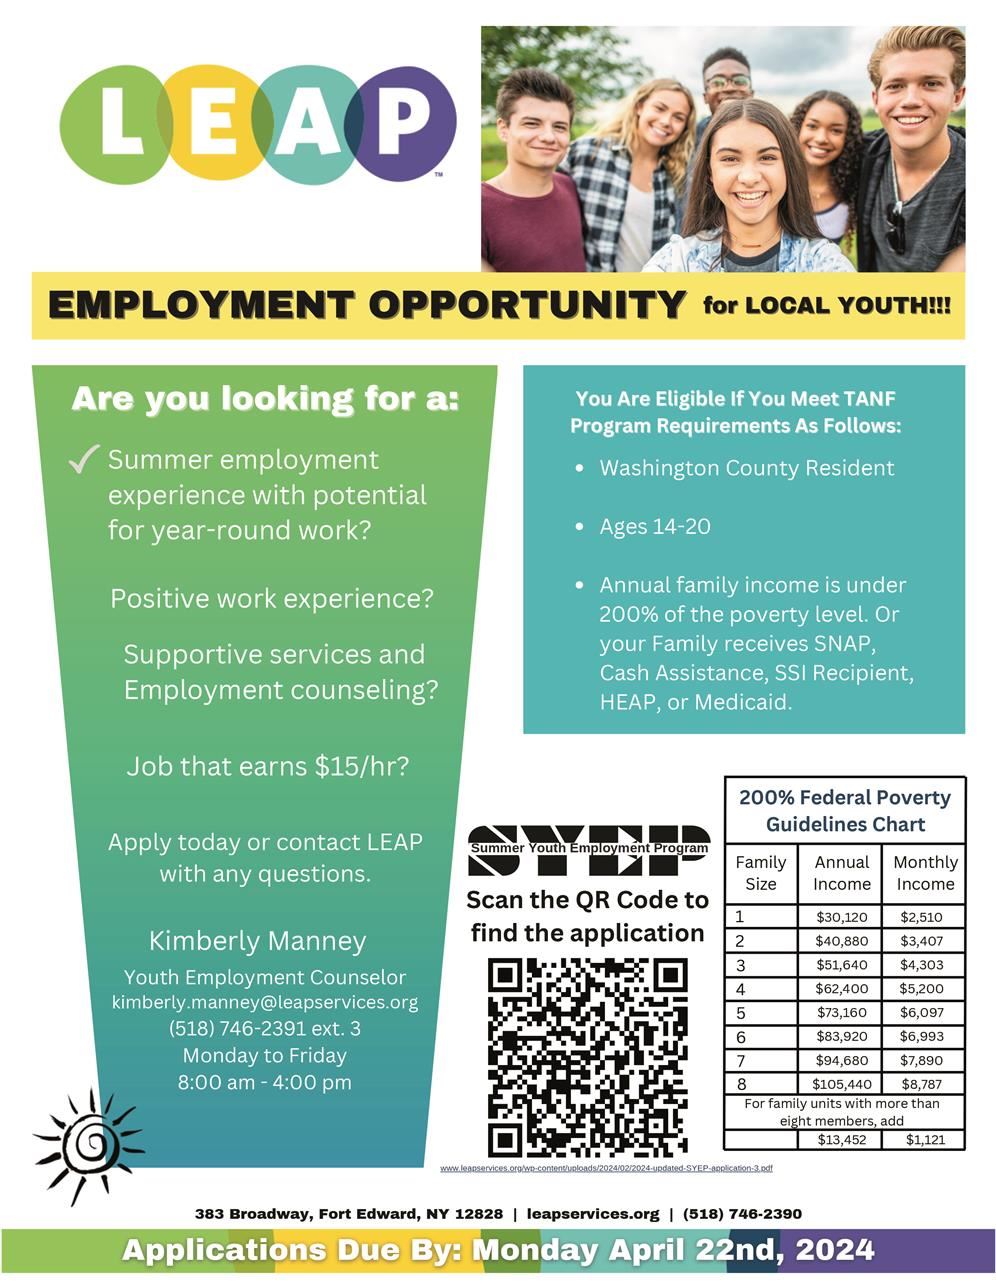 LEAP Employment Opportunity